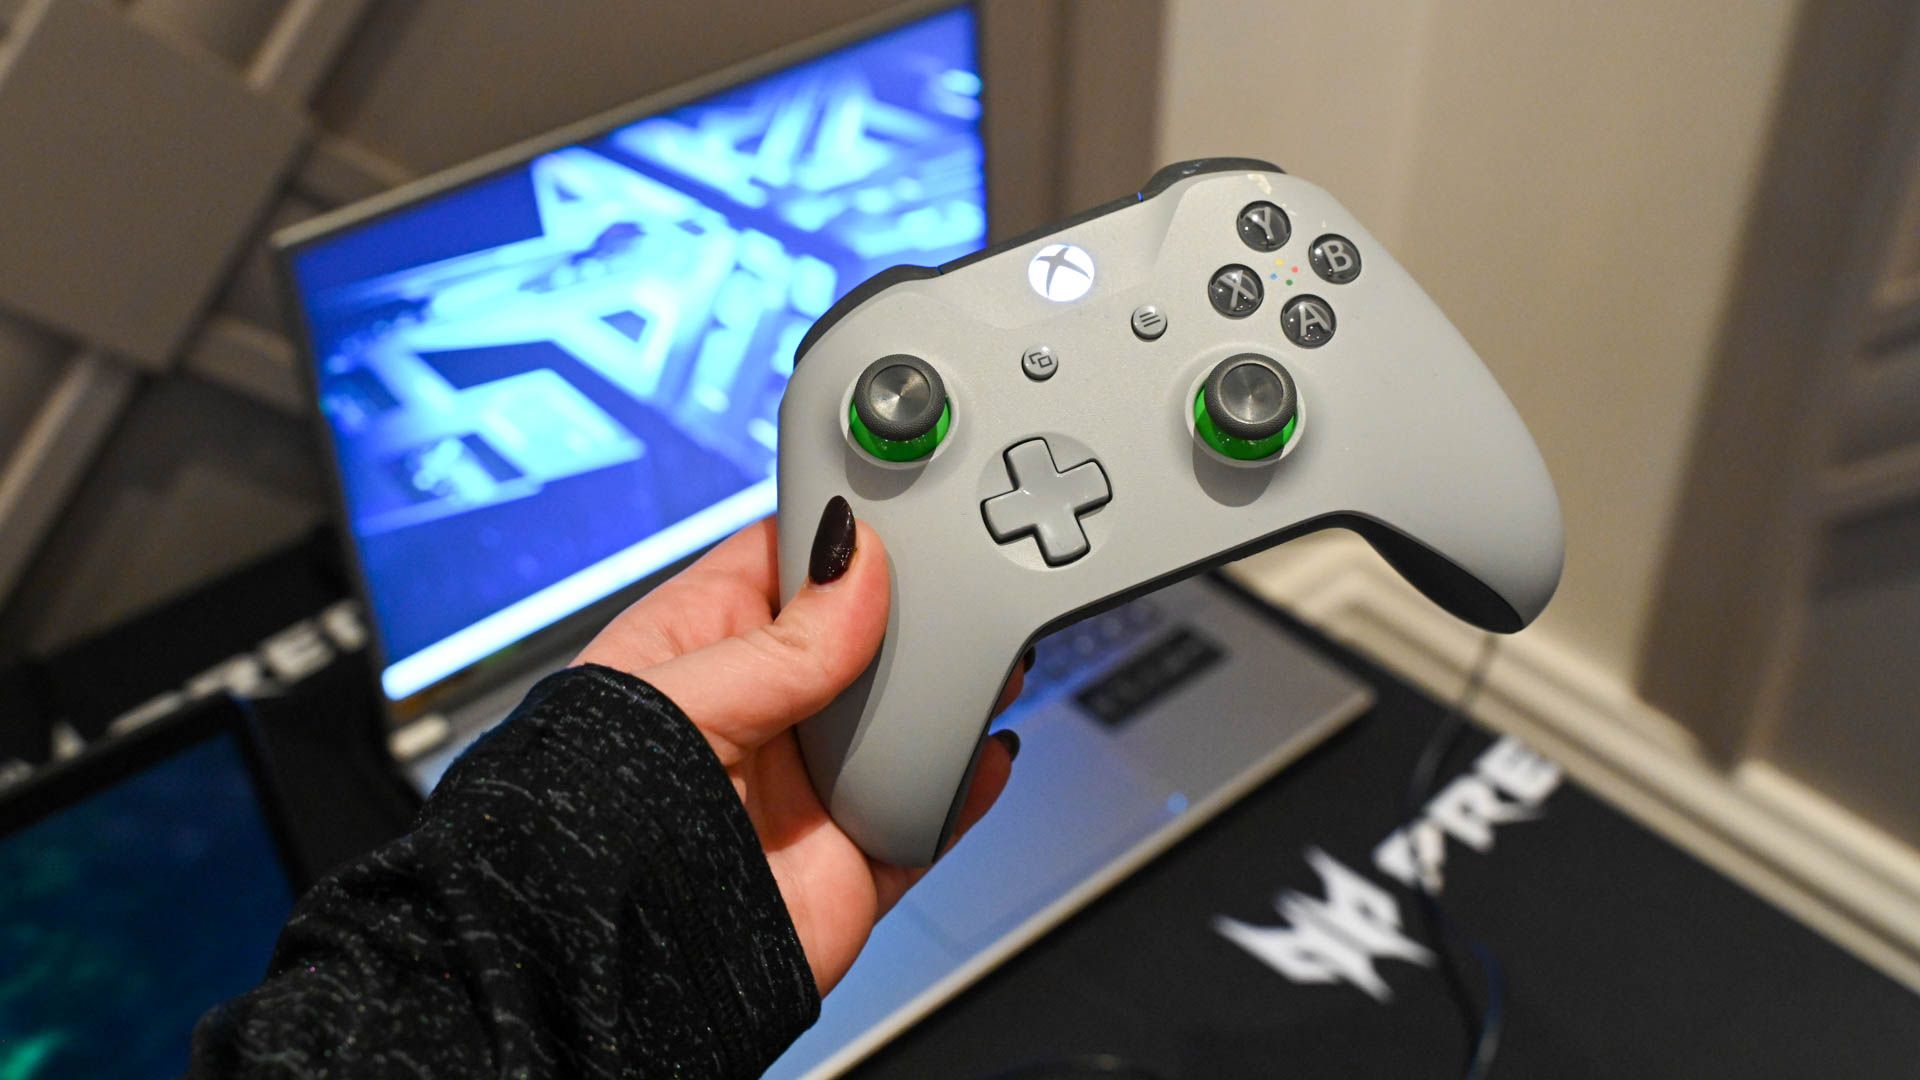 Xbox Controller being used for PC Gaming